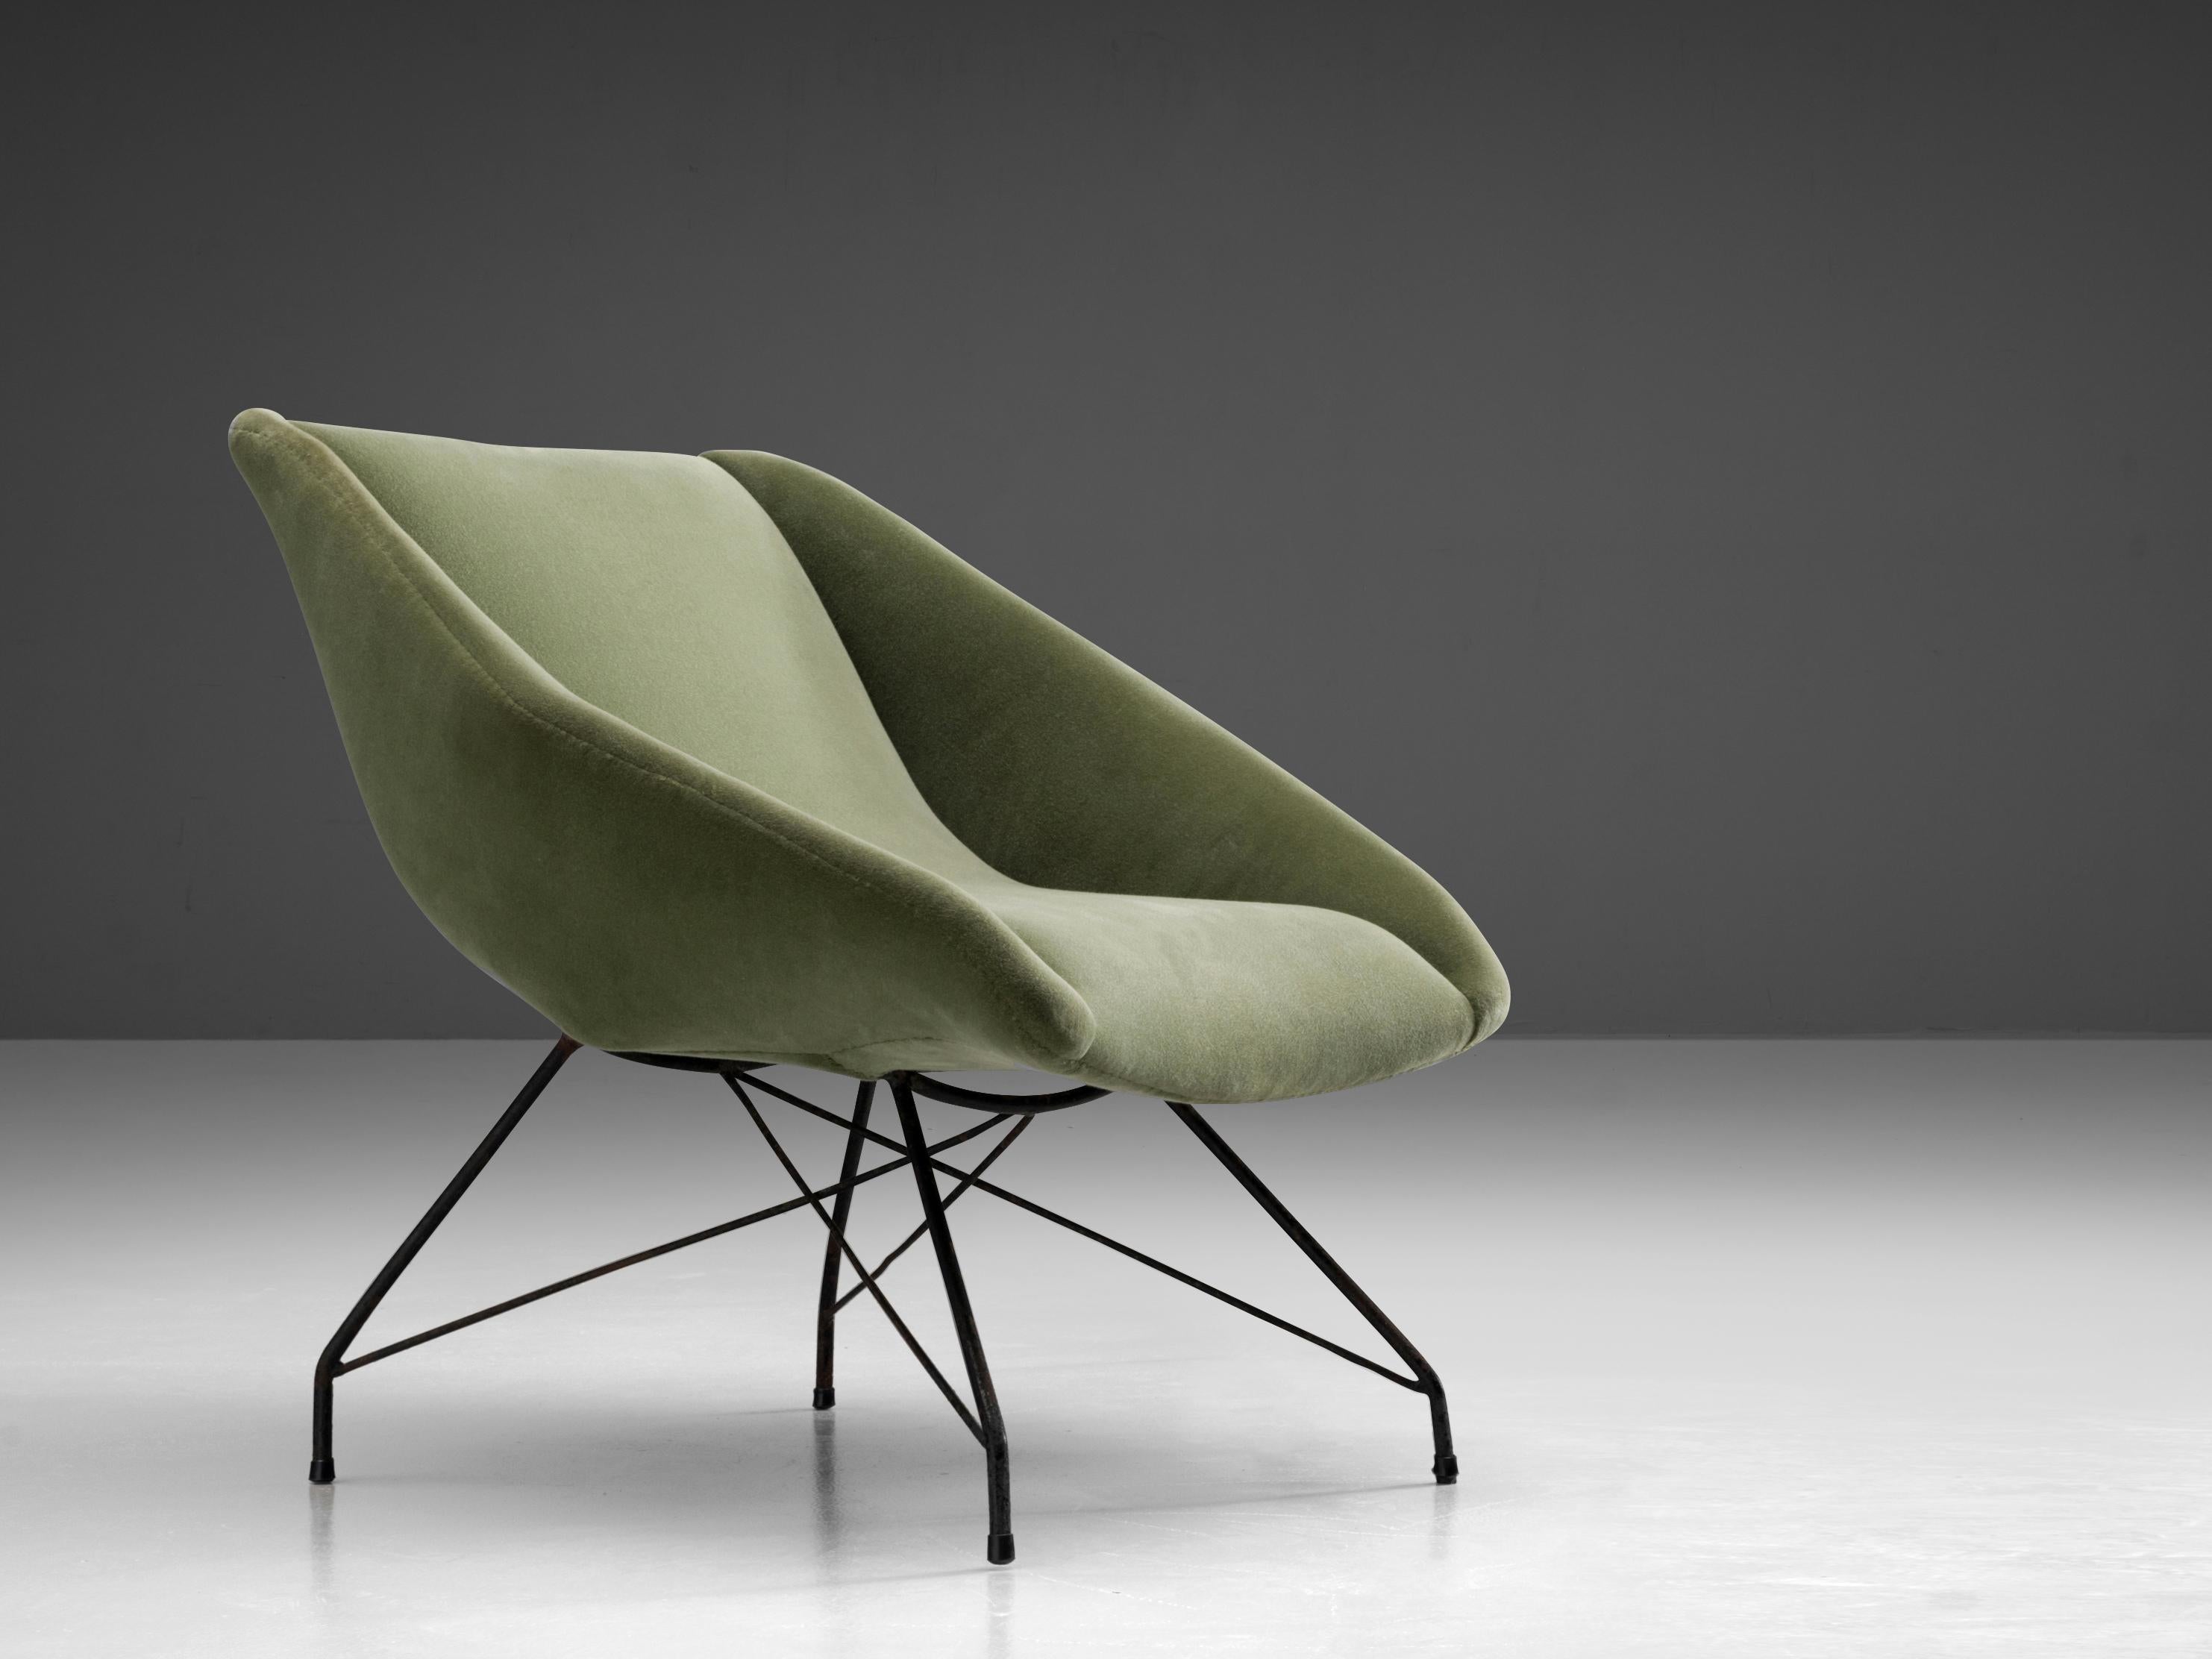 Carlo Hauner and Martin Eisler for Forma, lounge chair, coated iron, velvet, Brazil, 1950s

Elegant and modern armchair by Brazilian designer duo Hauner & Eisler. The thin, elegant frame is made in black coated iron. Due to the diagonal connection